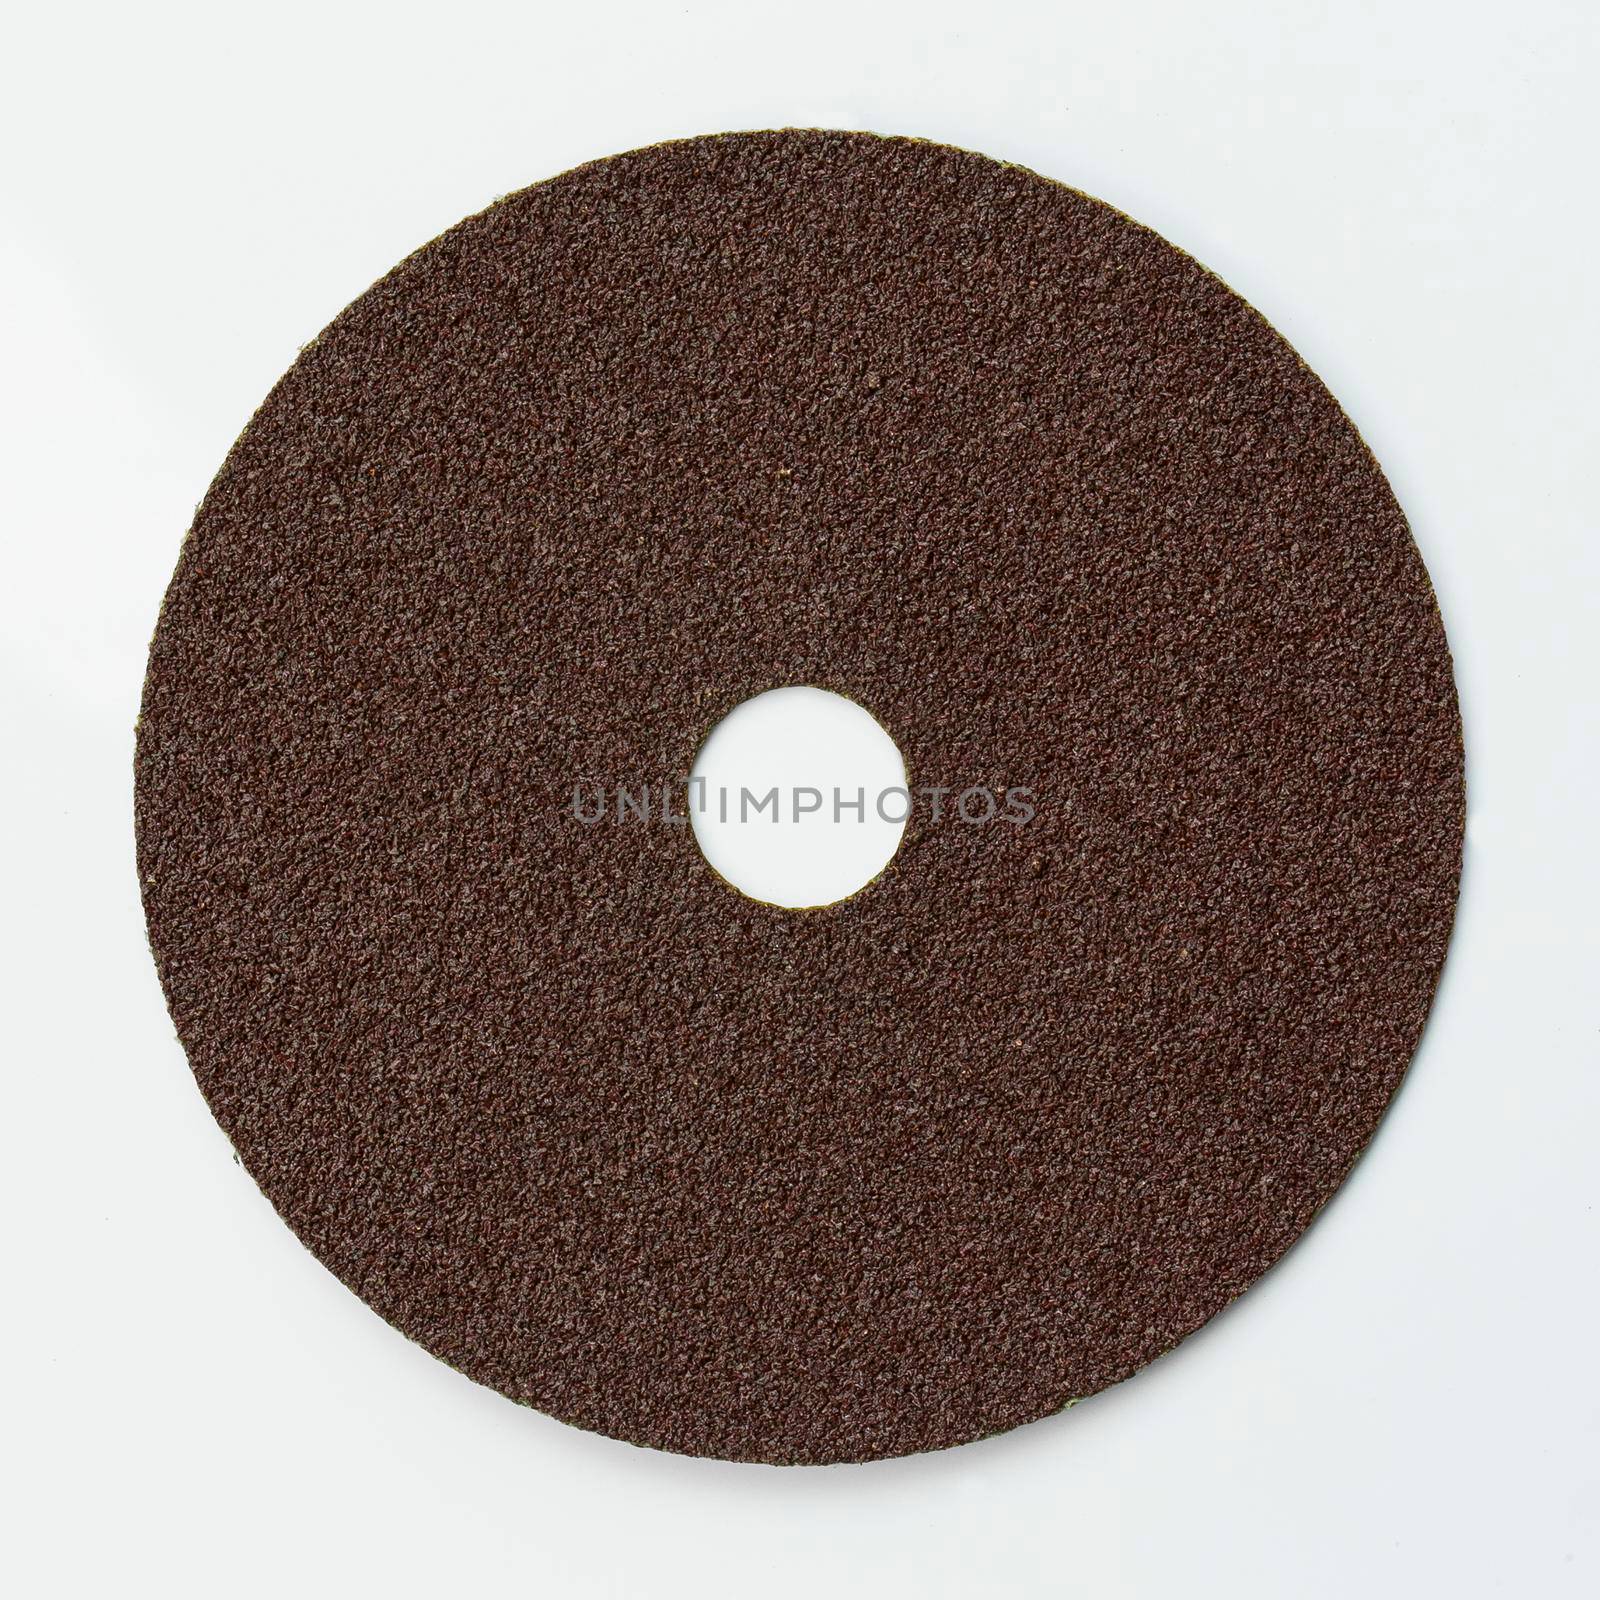 Red grinding wheel on white background